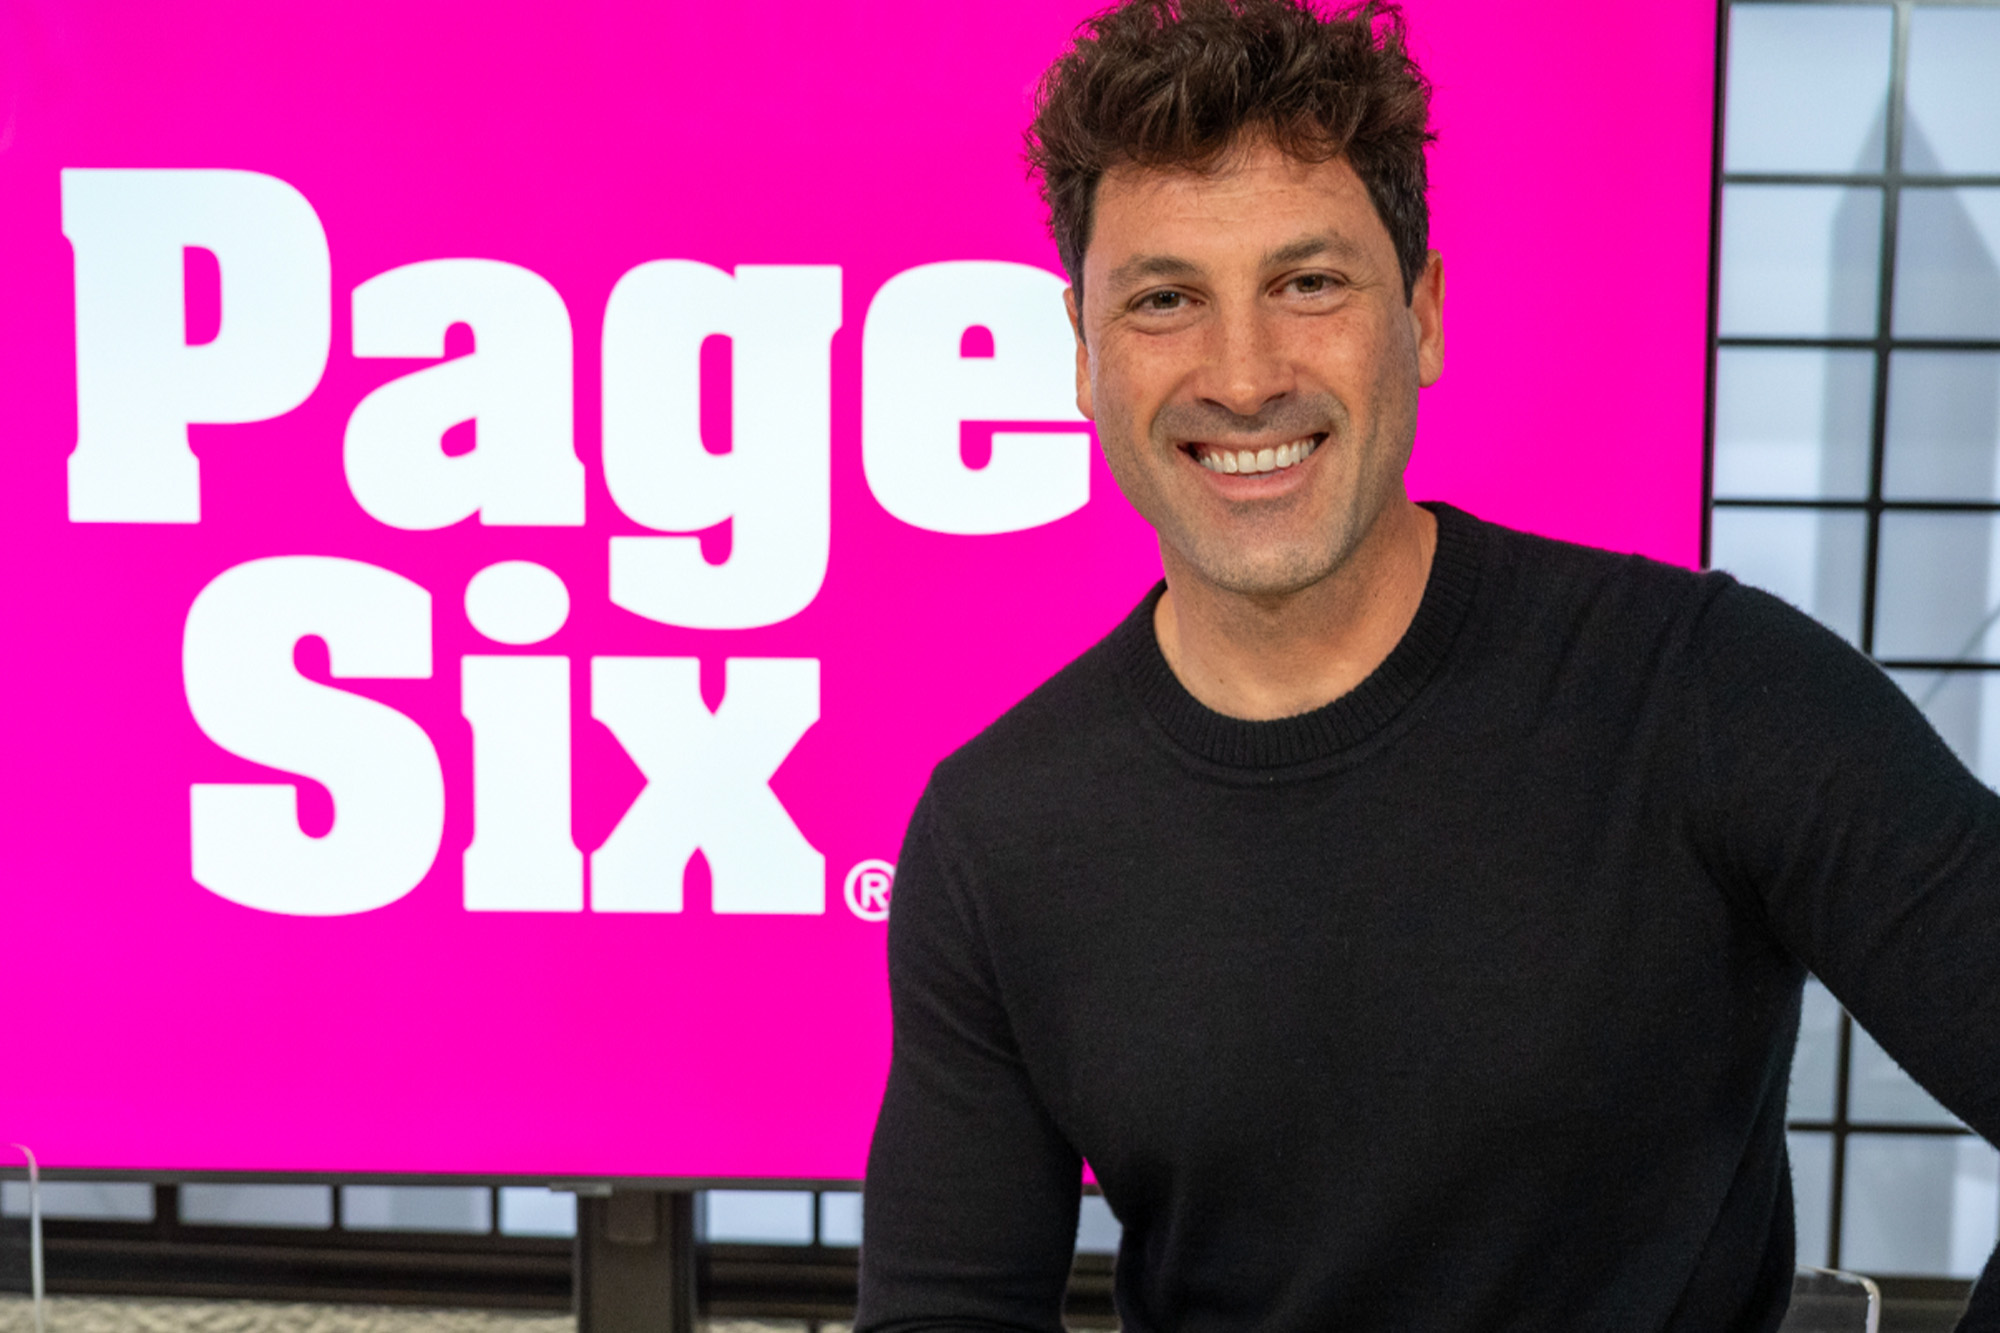 Maksim Chmerkovskiy is excited for Ariana Madix’s ‘Chicago’ casting versus past untrained celebs joining the production